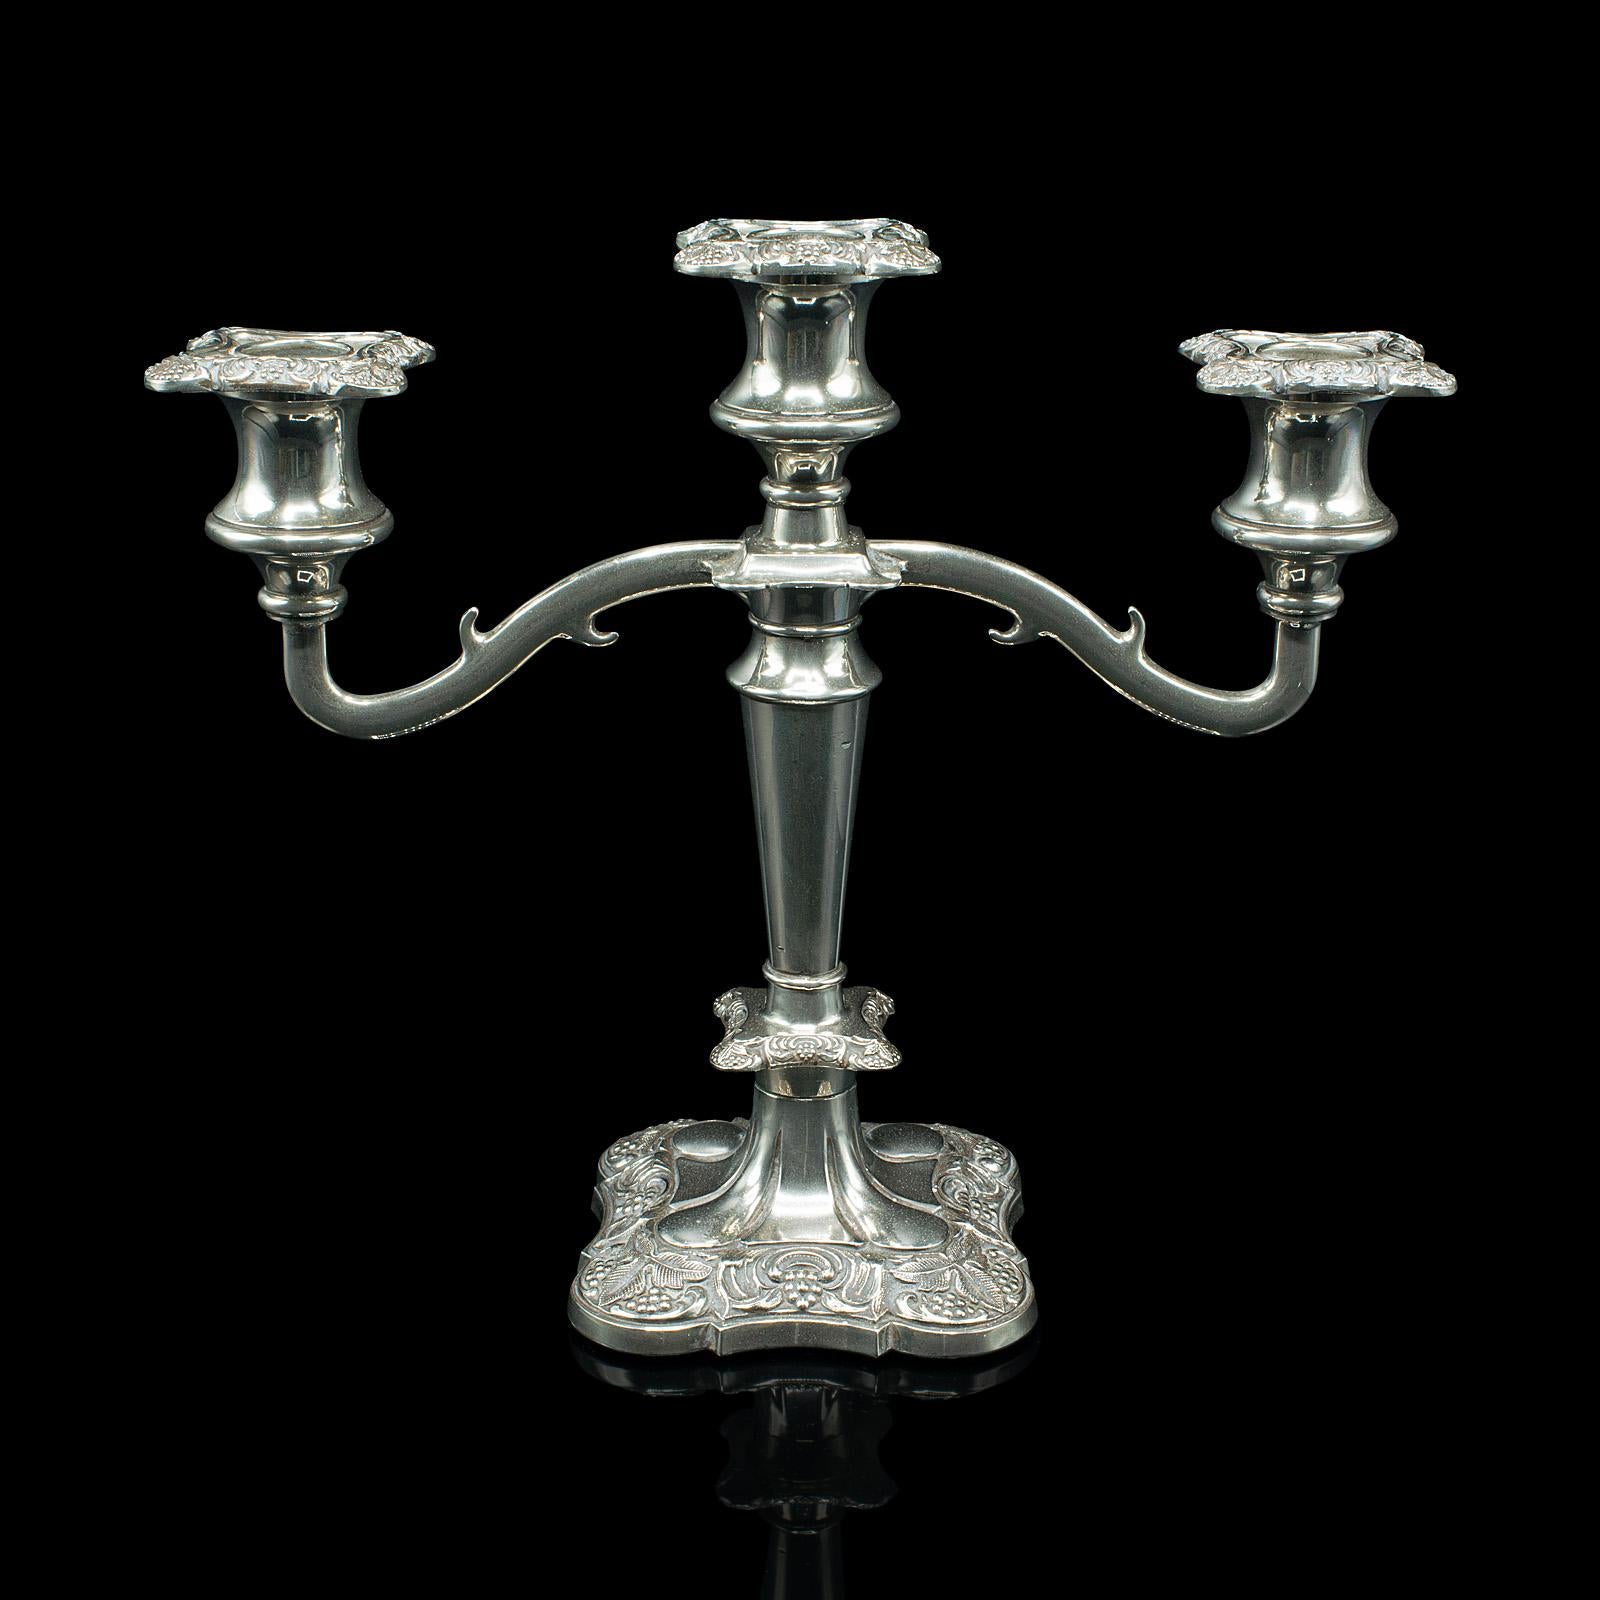 This is an antique decorative candelabra. An English, silver plated 3-branch centrepiece, dating to the late Victorian period, circa 1900.

Appealing late Victorian centrepiece with fine detail and elegant craftsmanship
Displays a desirable aged